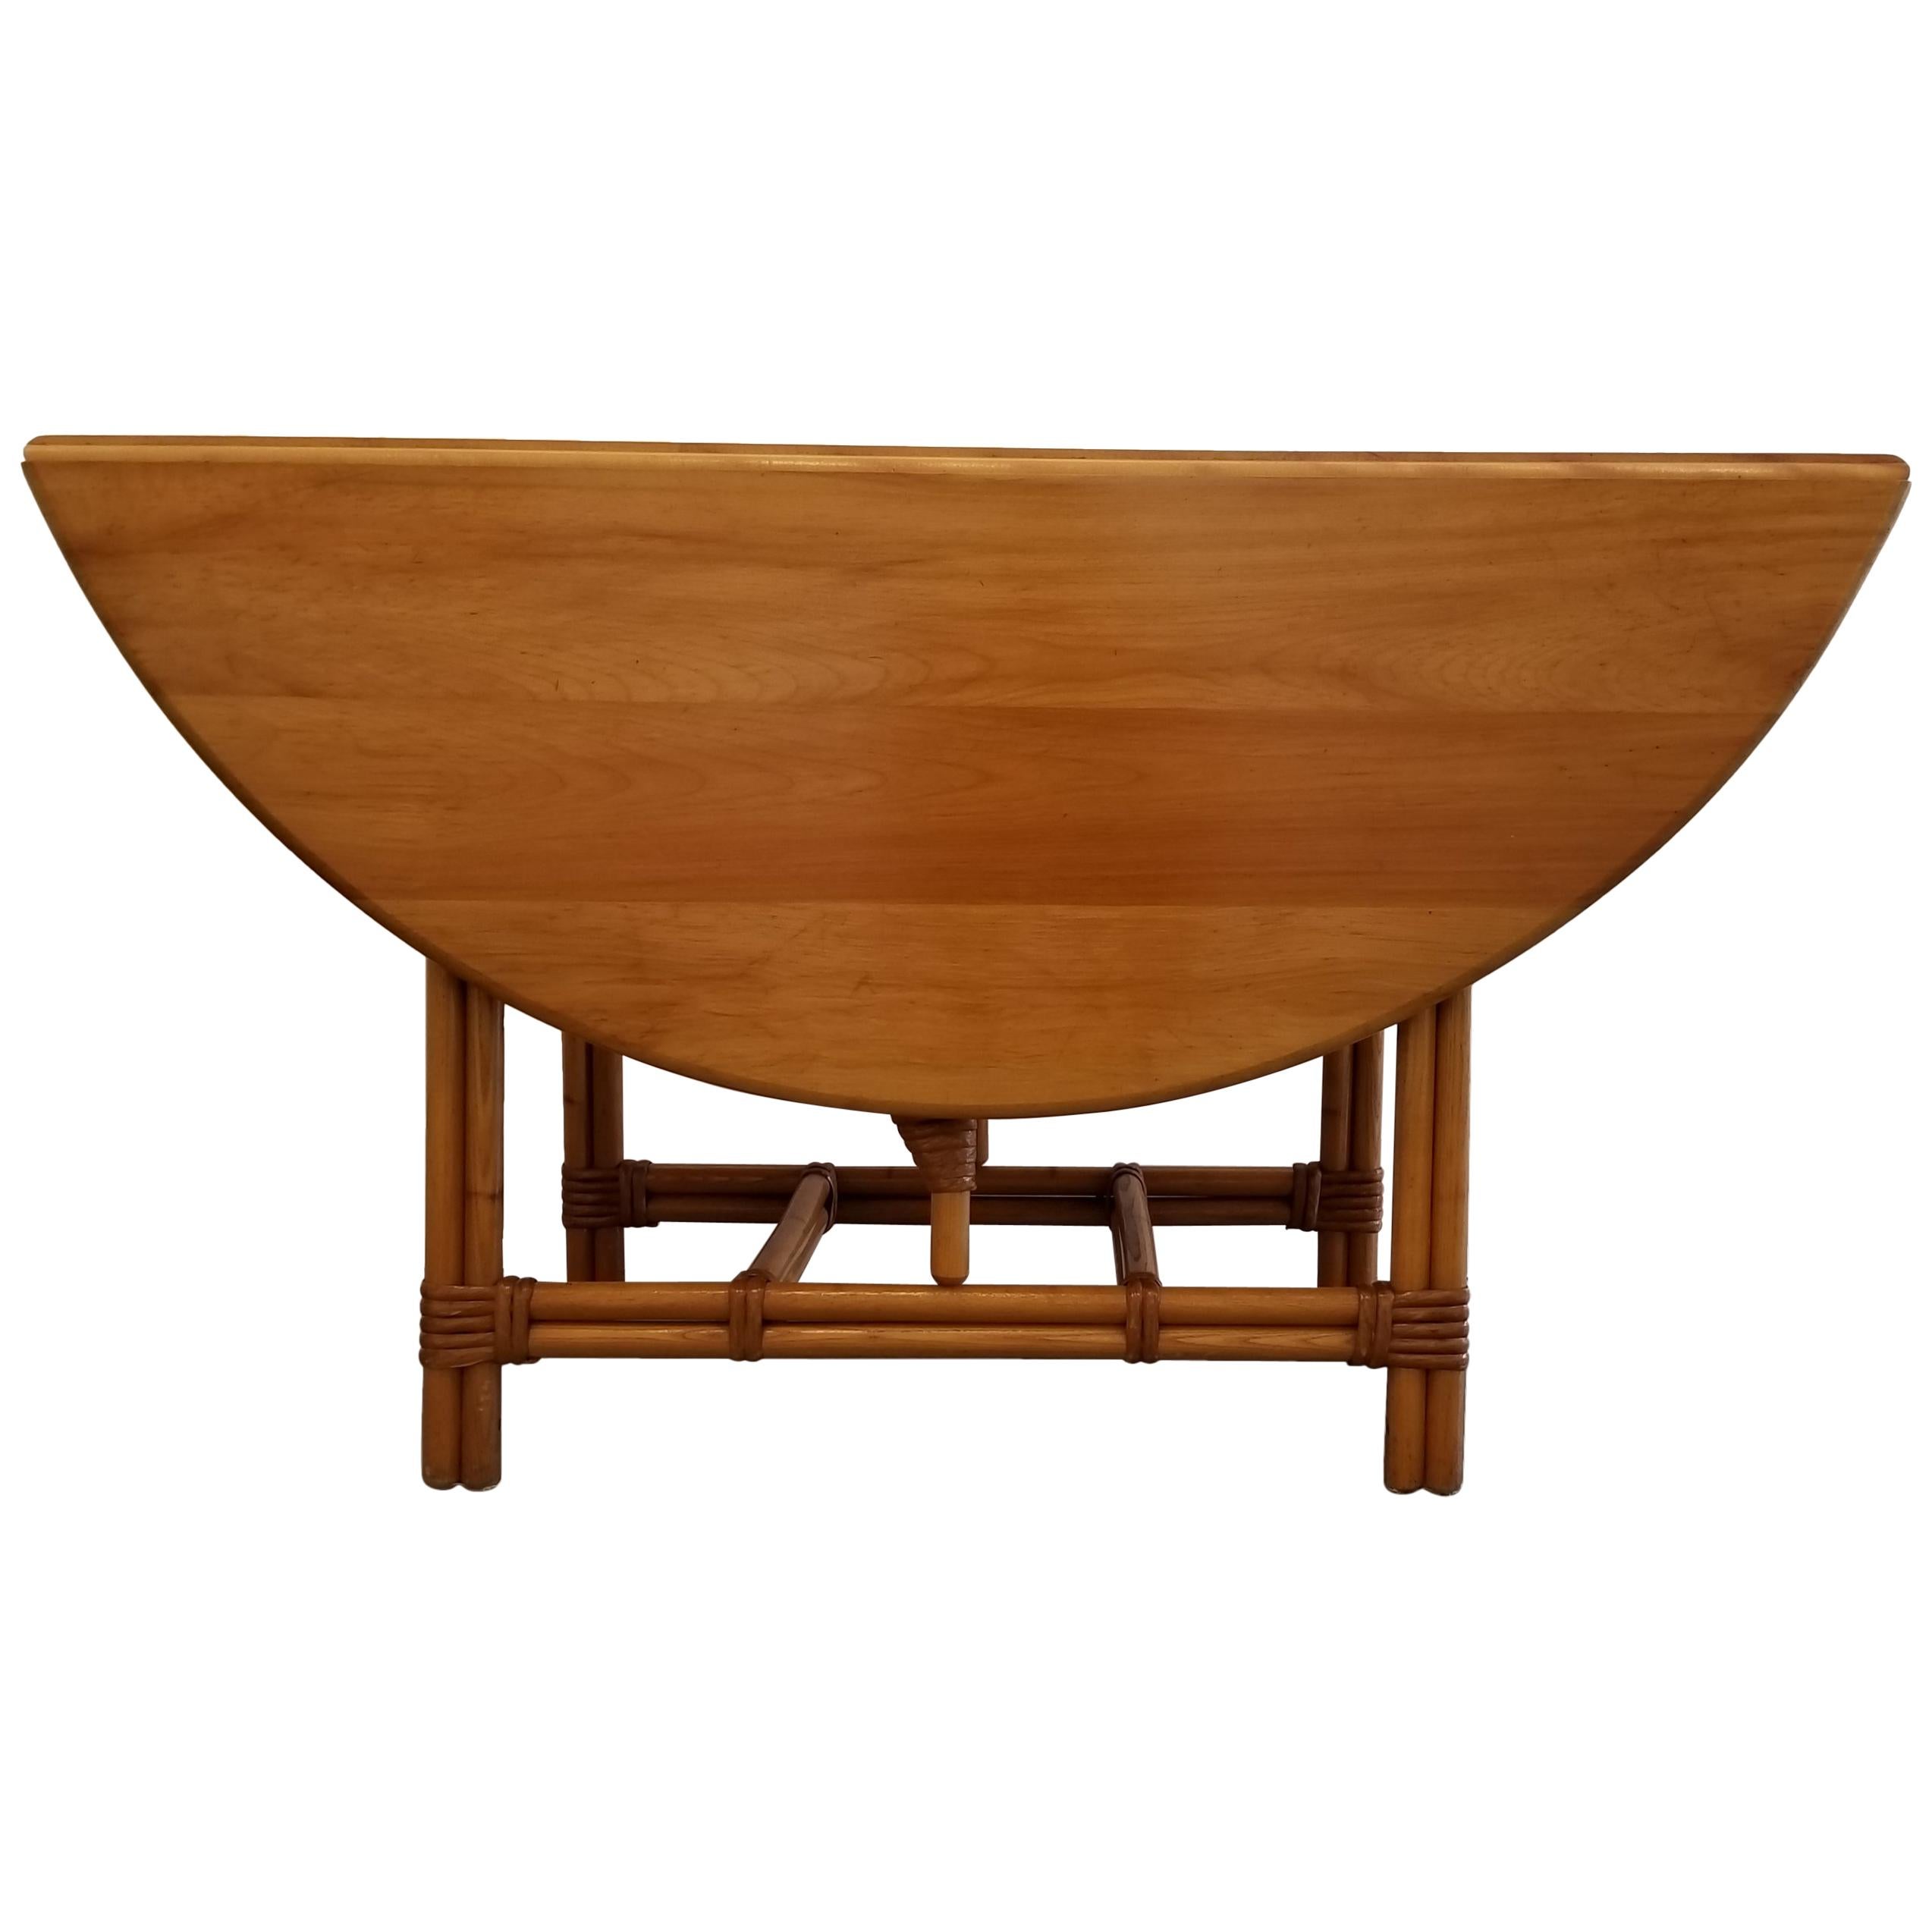 Rattan, Maple and Ash Gateleg Dining Table by Heywood Wakefield